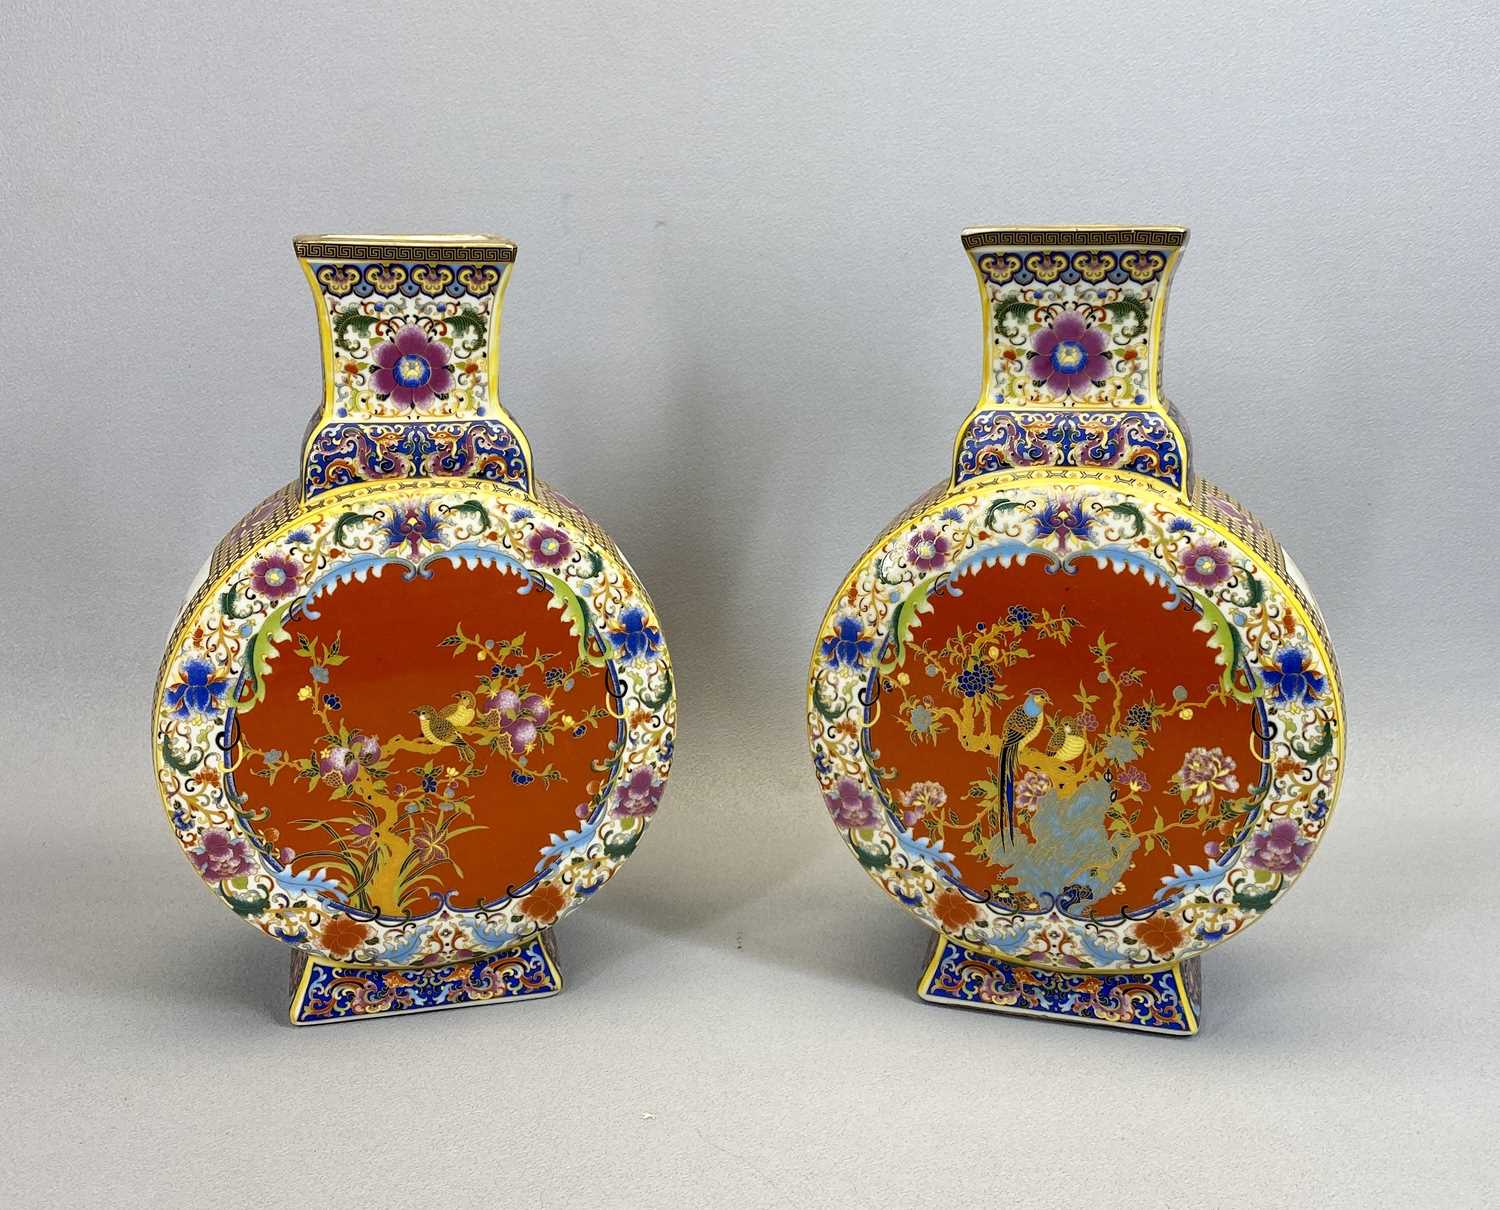 CHINESE PORCELAIN MOON FLASK VASES, A PAIR - 20th century, decorated enamels with central panels